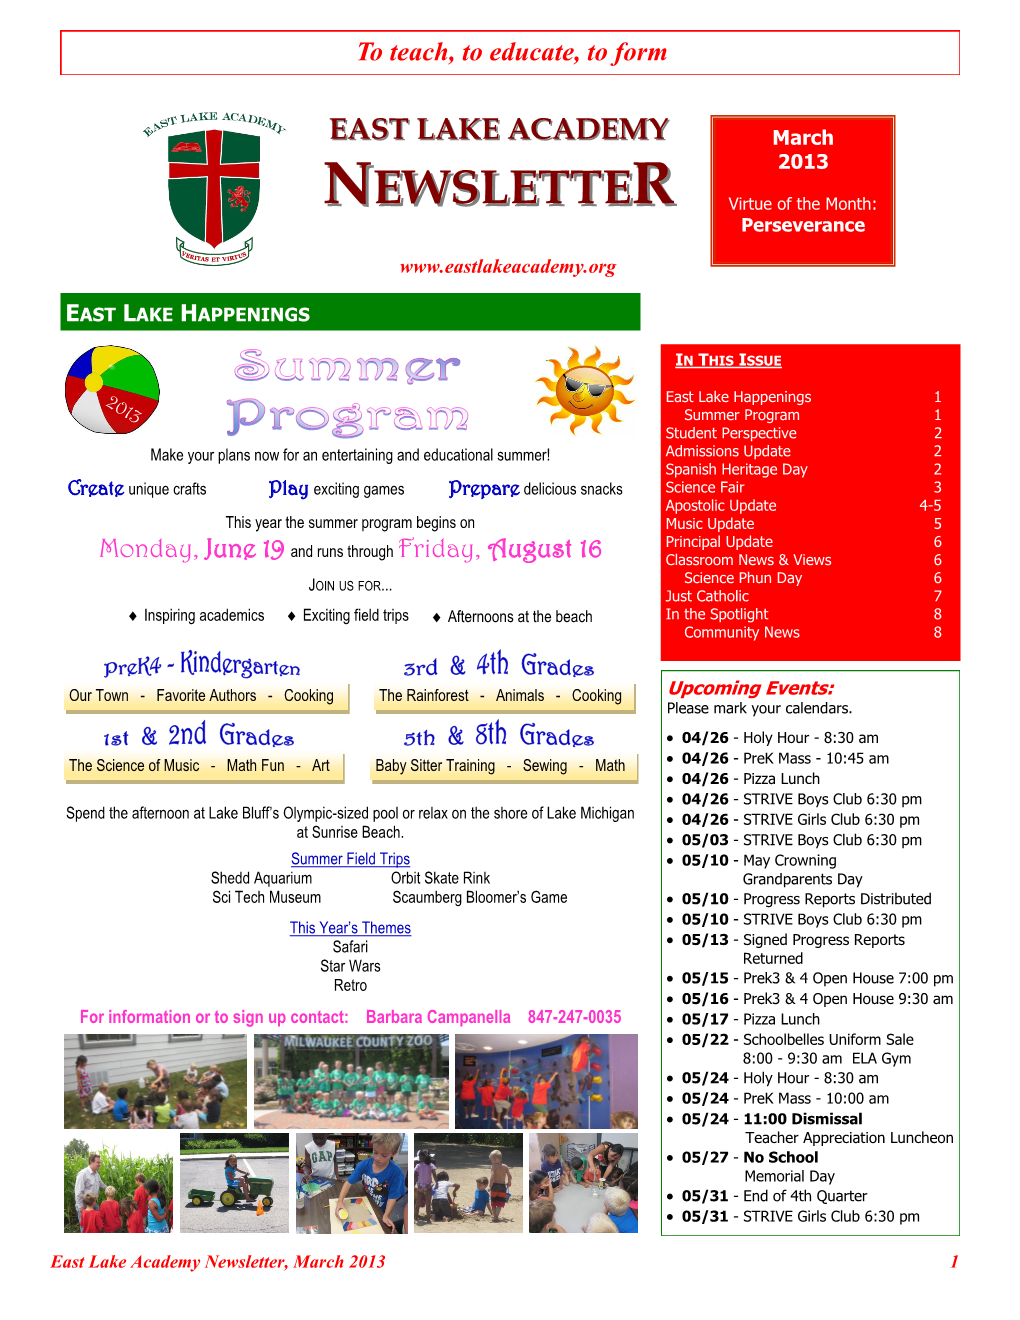 Newsletter, March 2013 1 to Teach, to Educate, to Form